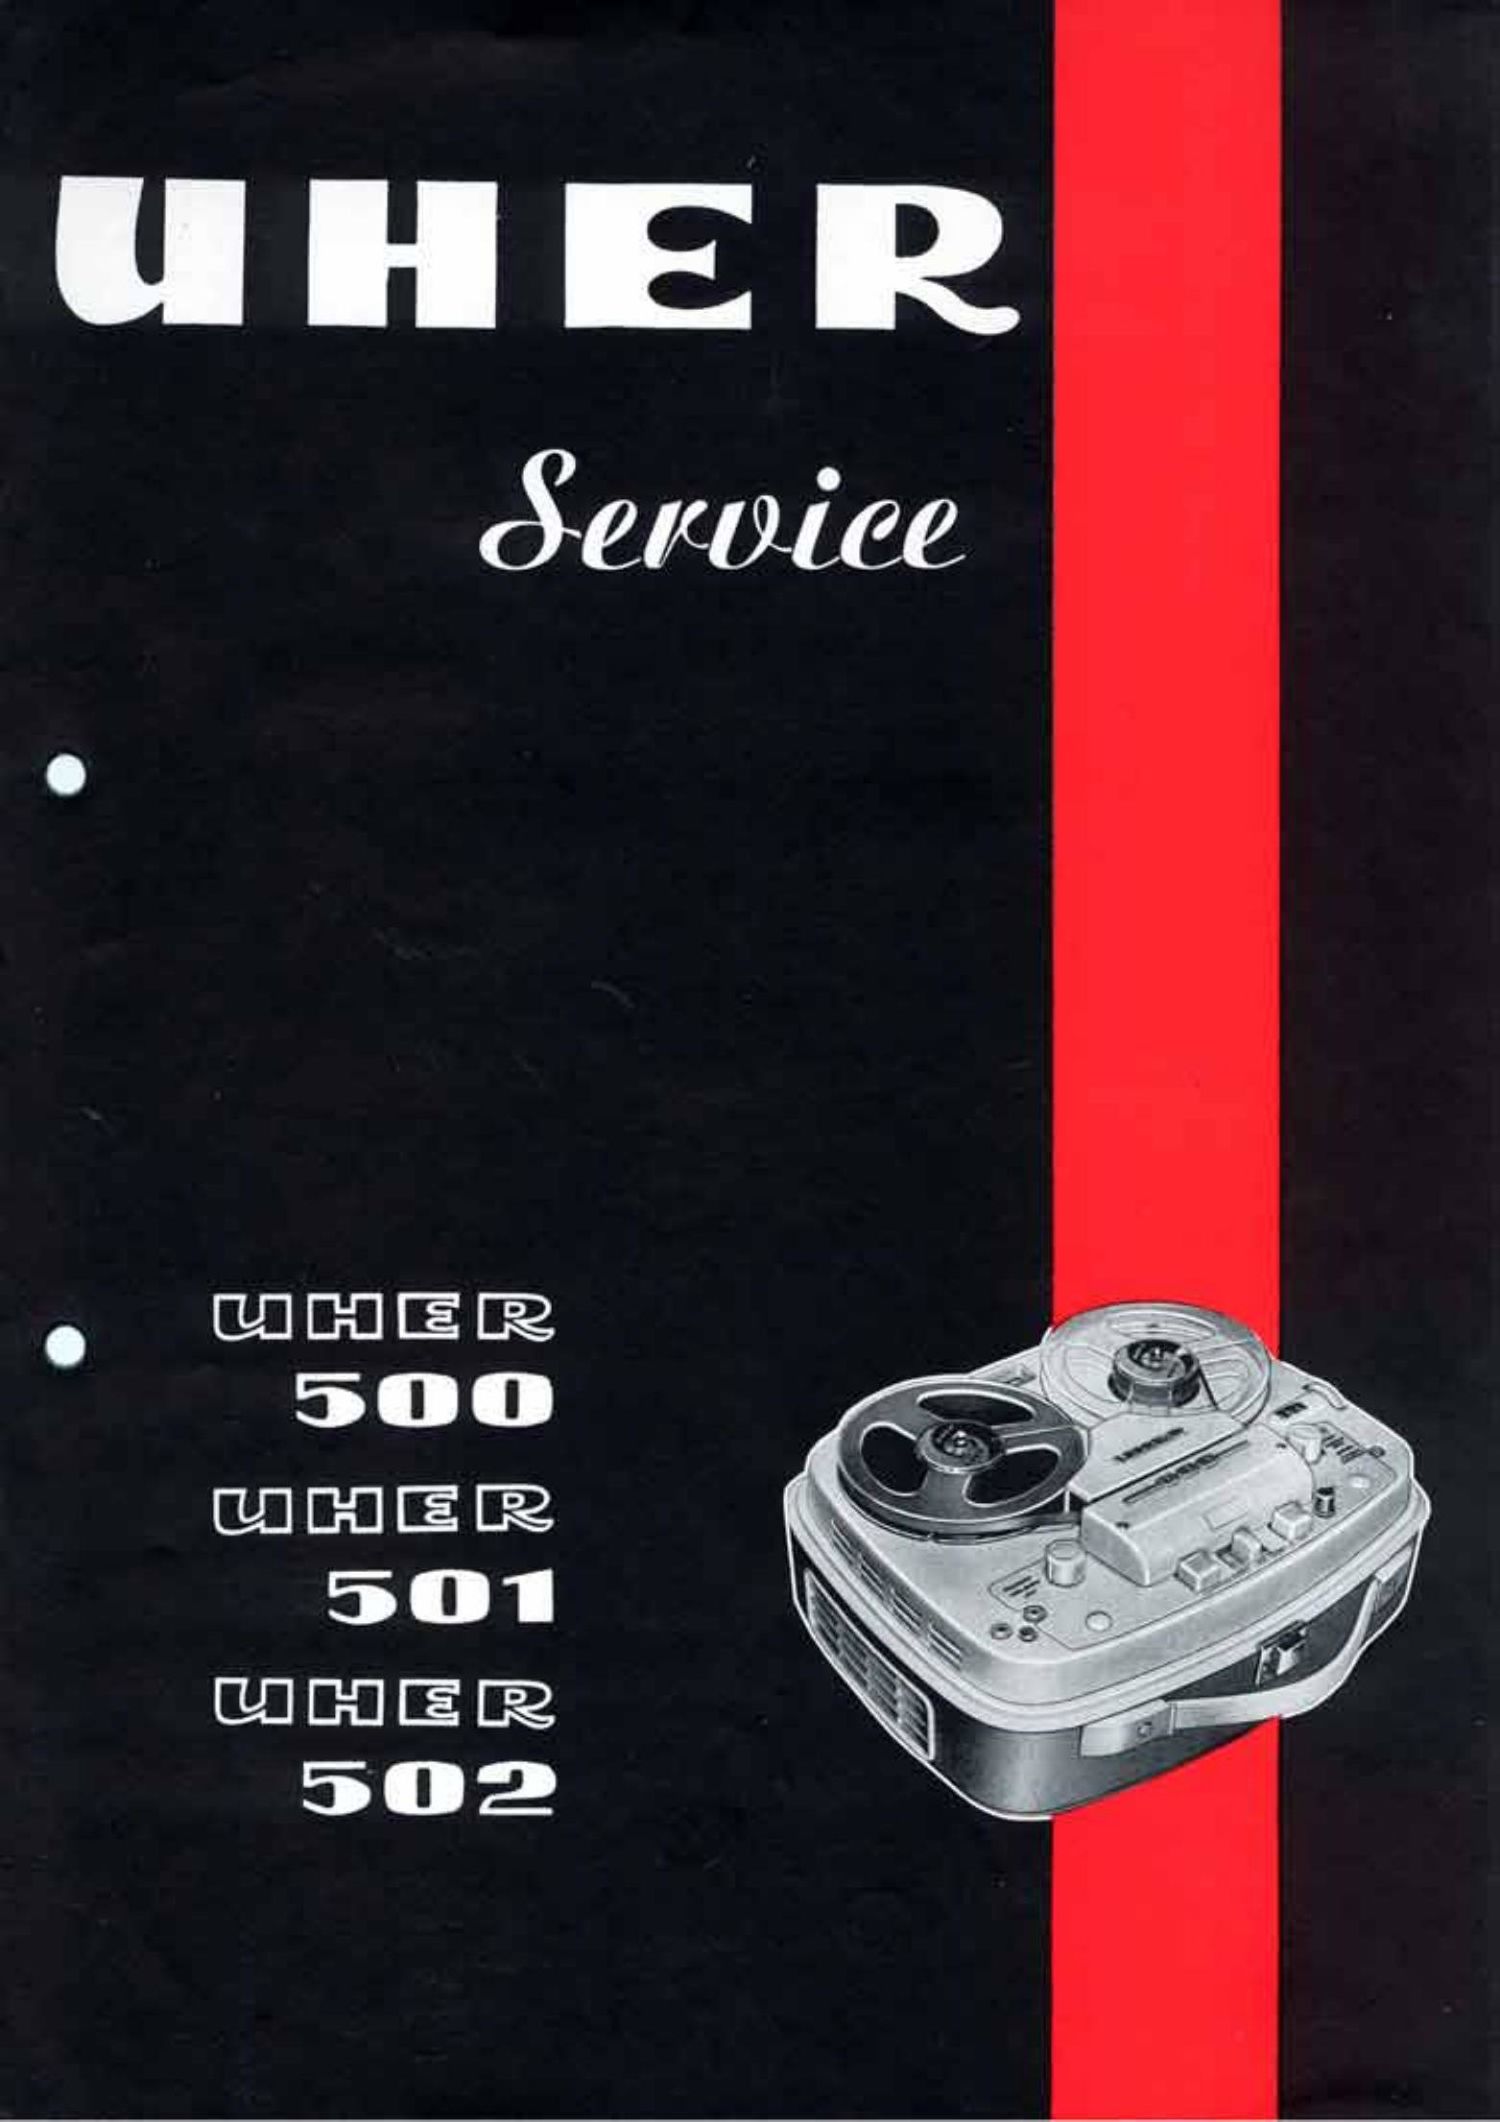 Uher 502 Service Manual